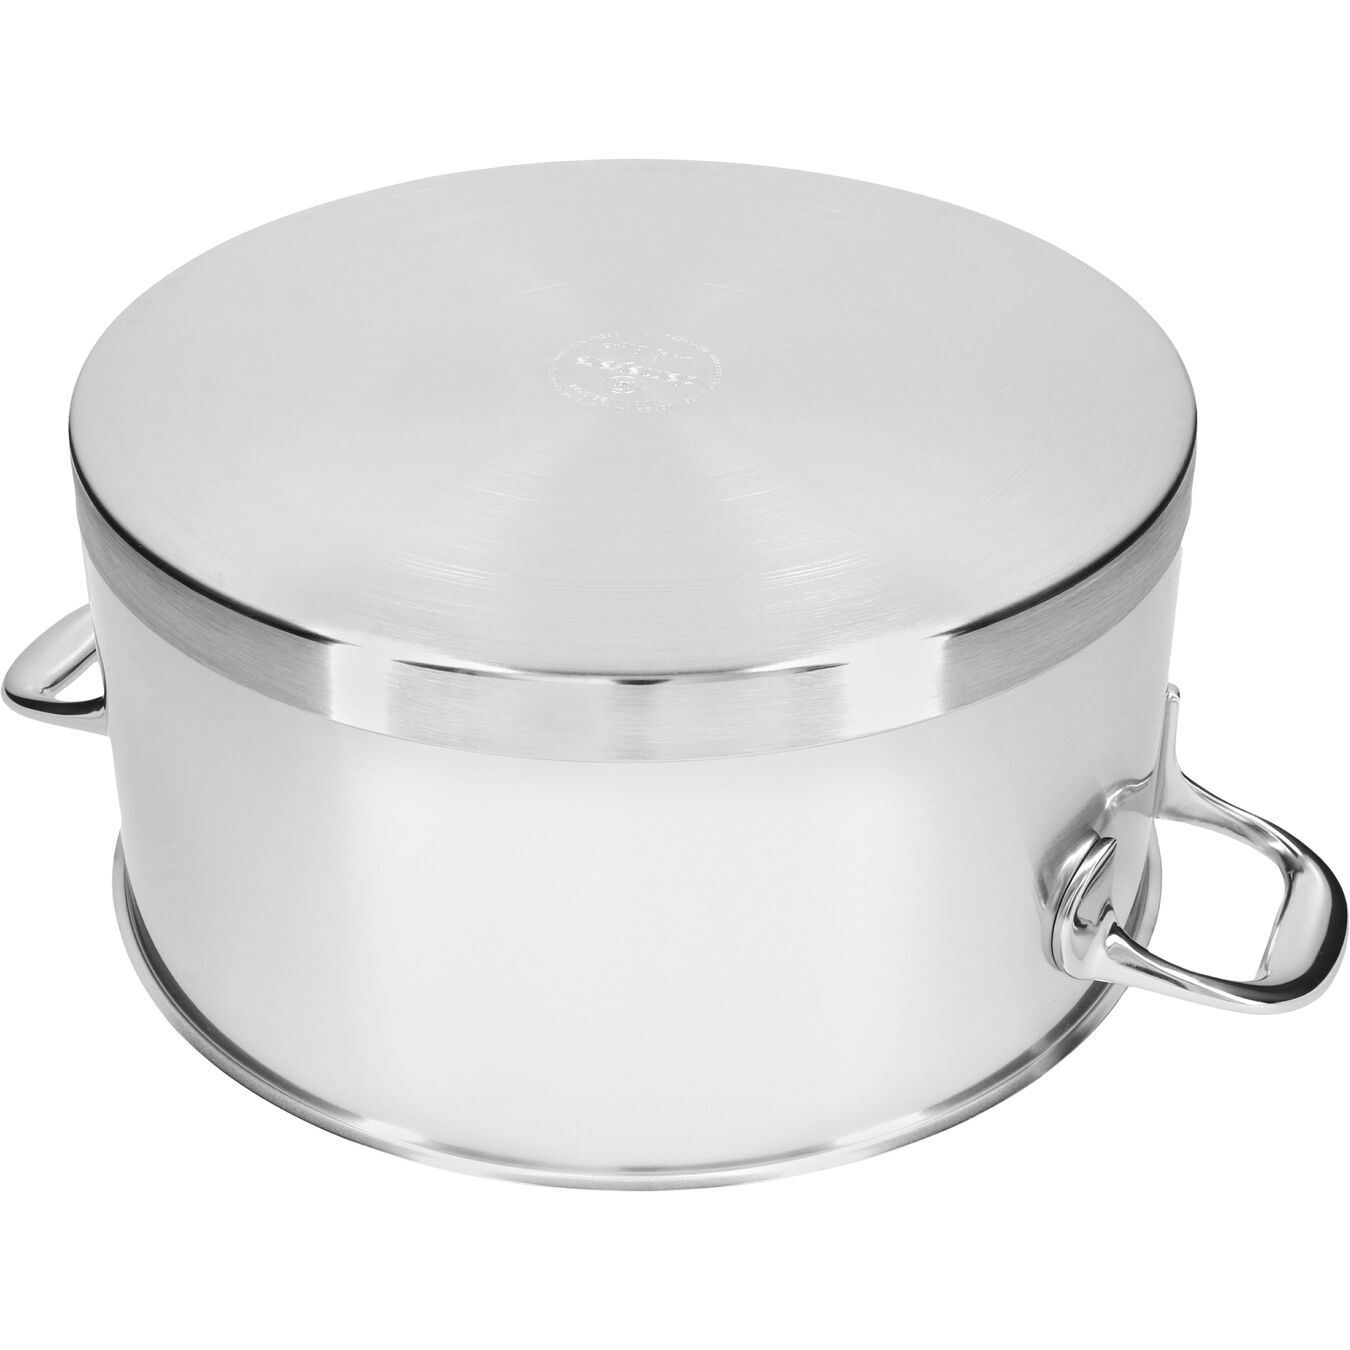 8.75 qt, 18/10 Stainless Steel, Dutch Oven with Lid,,large 5